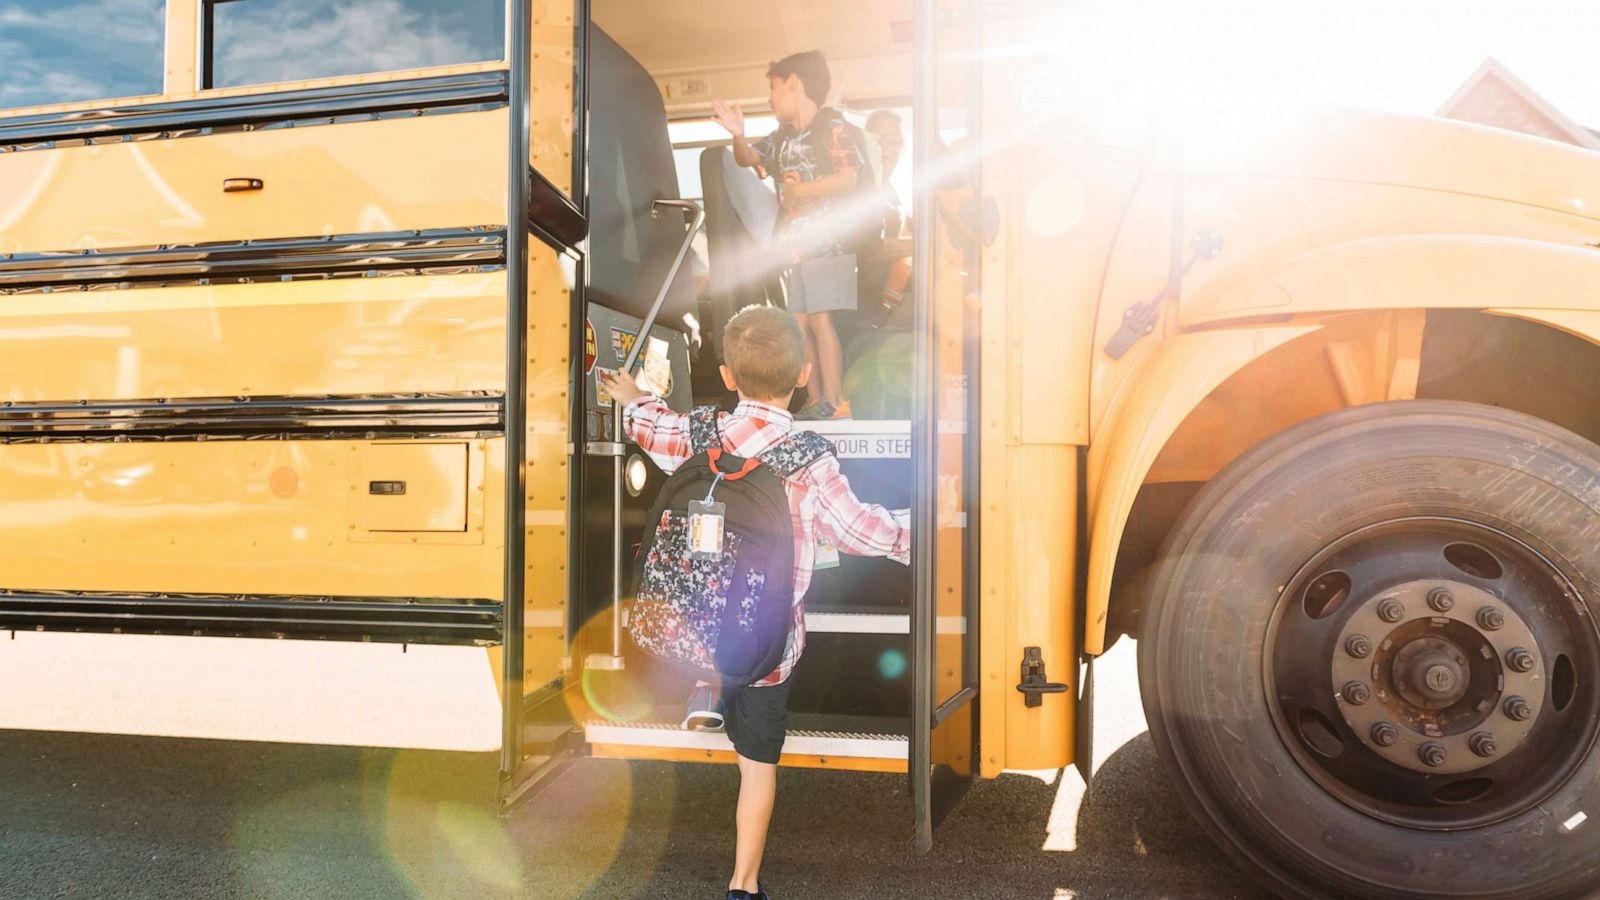 PHOTO: Students board a school bus in New Lennox, Ill. in an undated stock image.